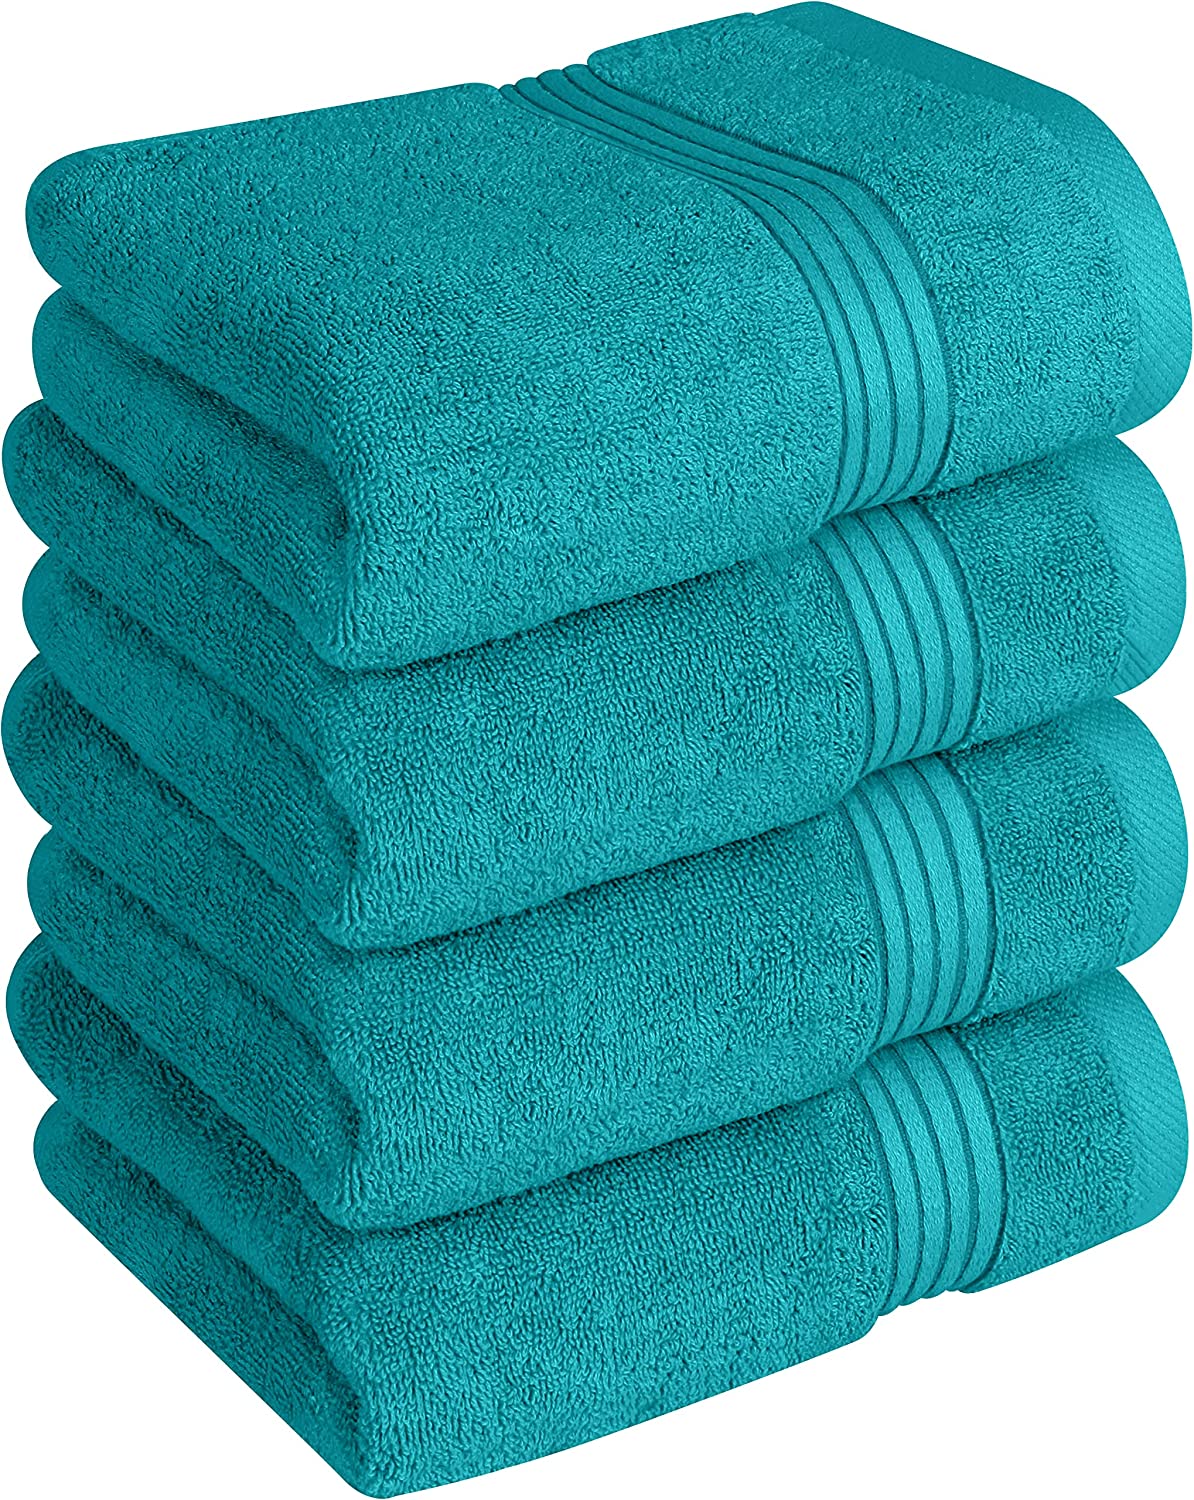  Utopia Towels 6 Piece Premium Hand Towels Set, (16 x 28 inches)  100% Ring Spun Cotton, Lightweight and Highly Absorbent Towels for Bathroom,  Travel, Camp, Hotel, and Spa (White) : Home & Kitchen